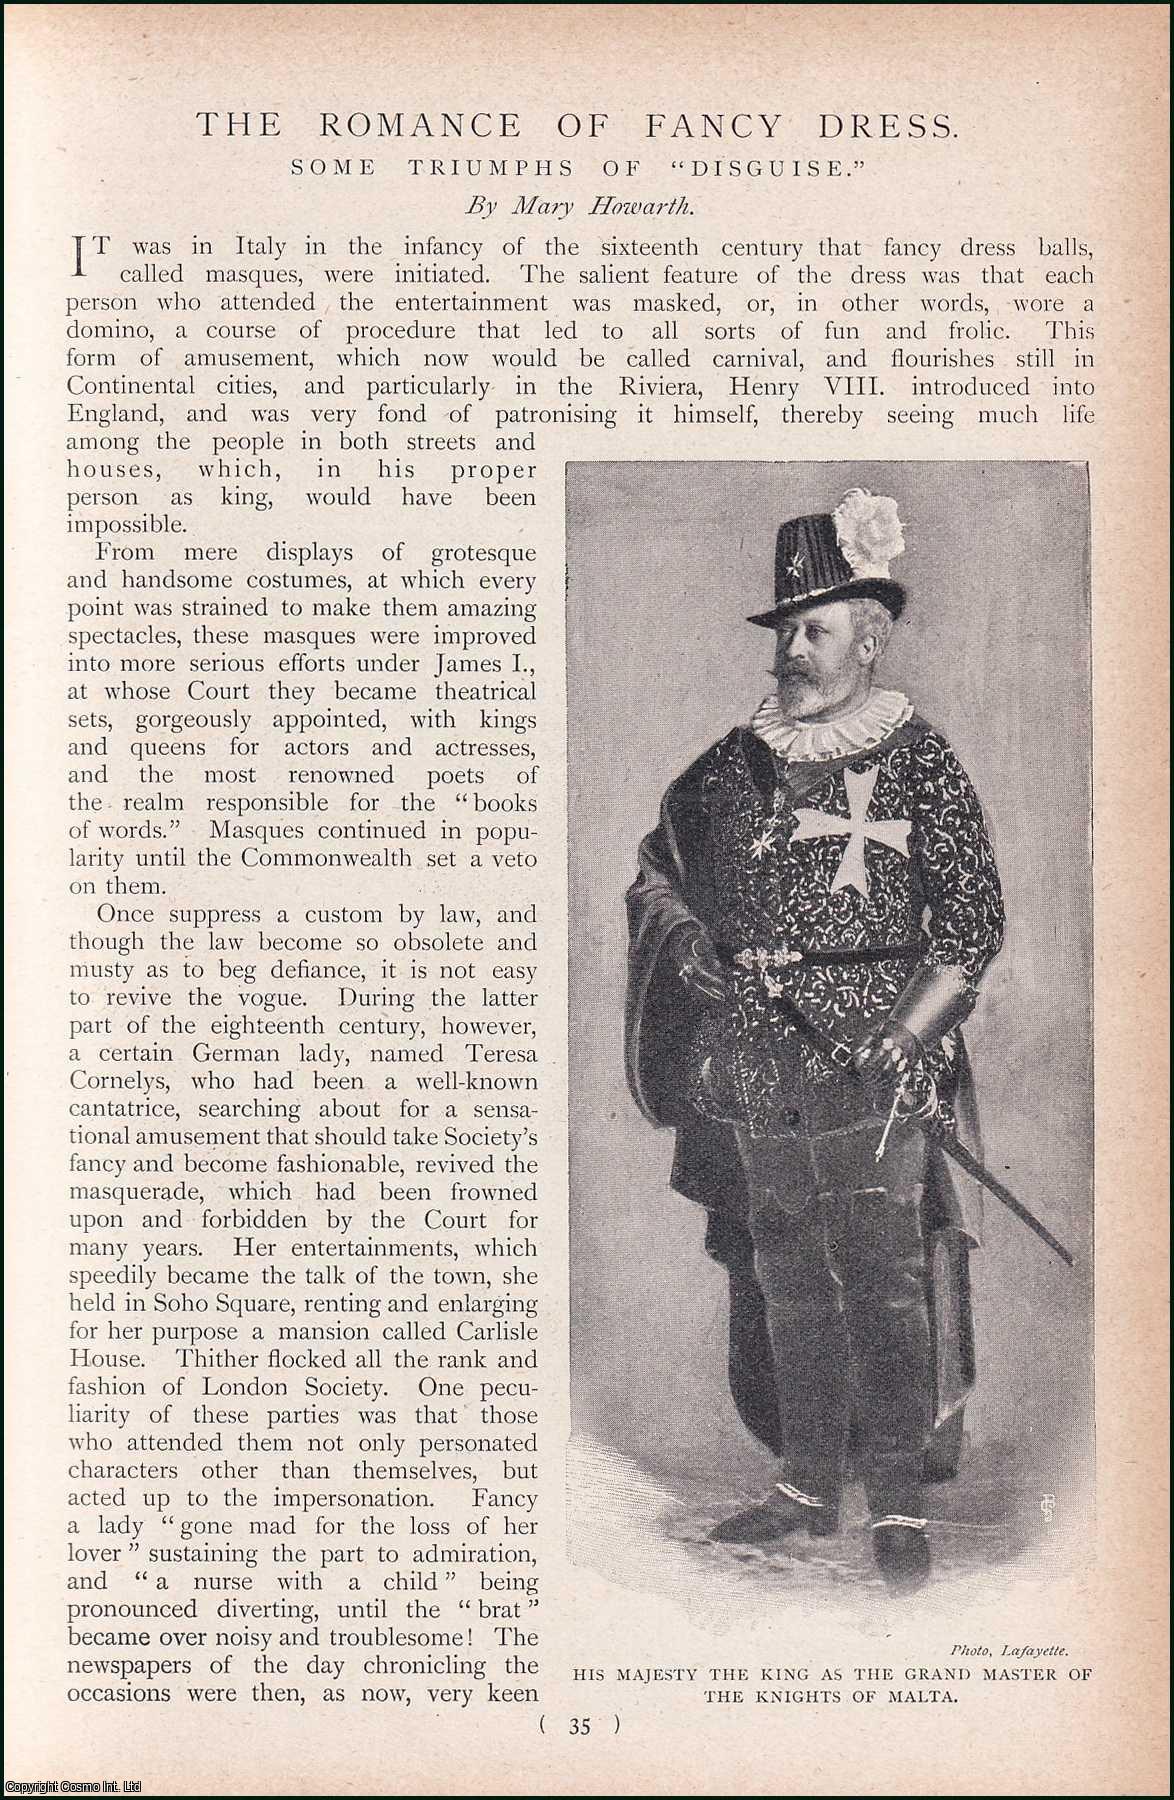 Mary Howarth - The Romance of Fancy Dress : Italy in the Infancy of the Sixteenth Century that Fancy Dress Balls, called Masques, were initiated. Some Triumphs of Disguise. An uncommon original article from the Harmsworth London Magazine, 1902.